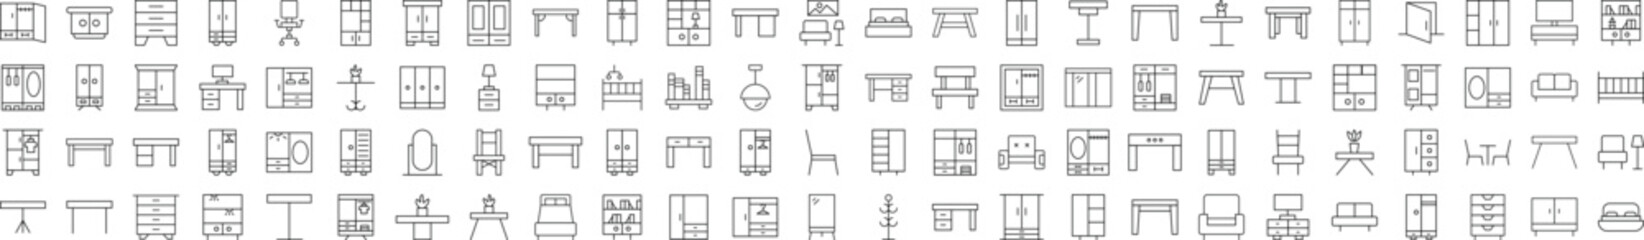 Furniture Monoline Icons. Perfect for design, infographics, web sites, apps.